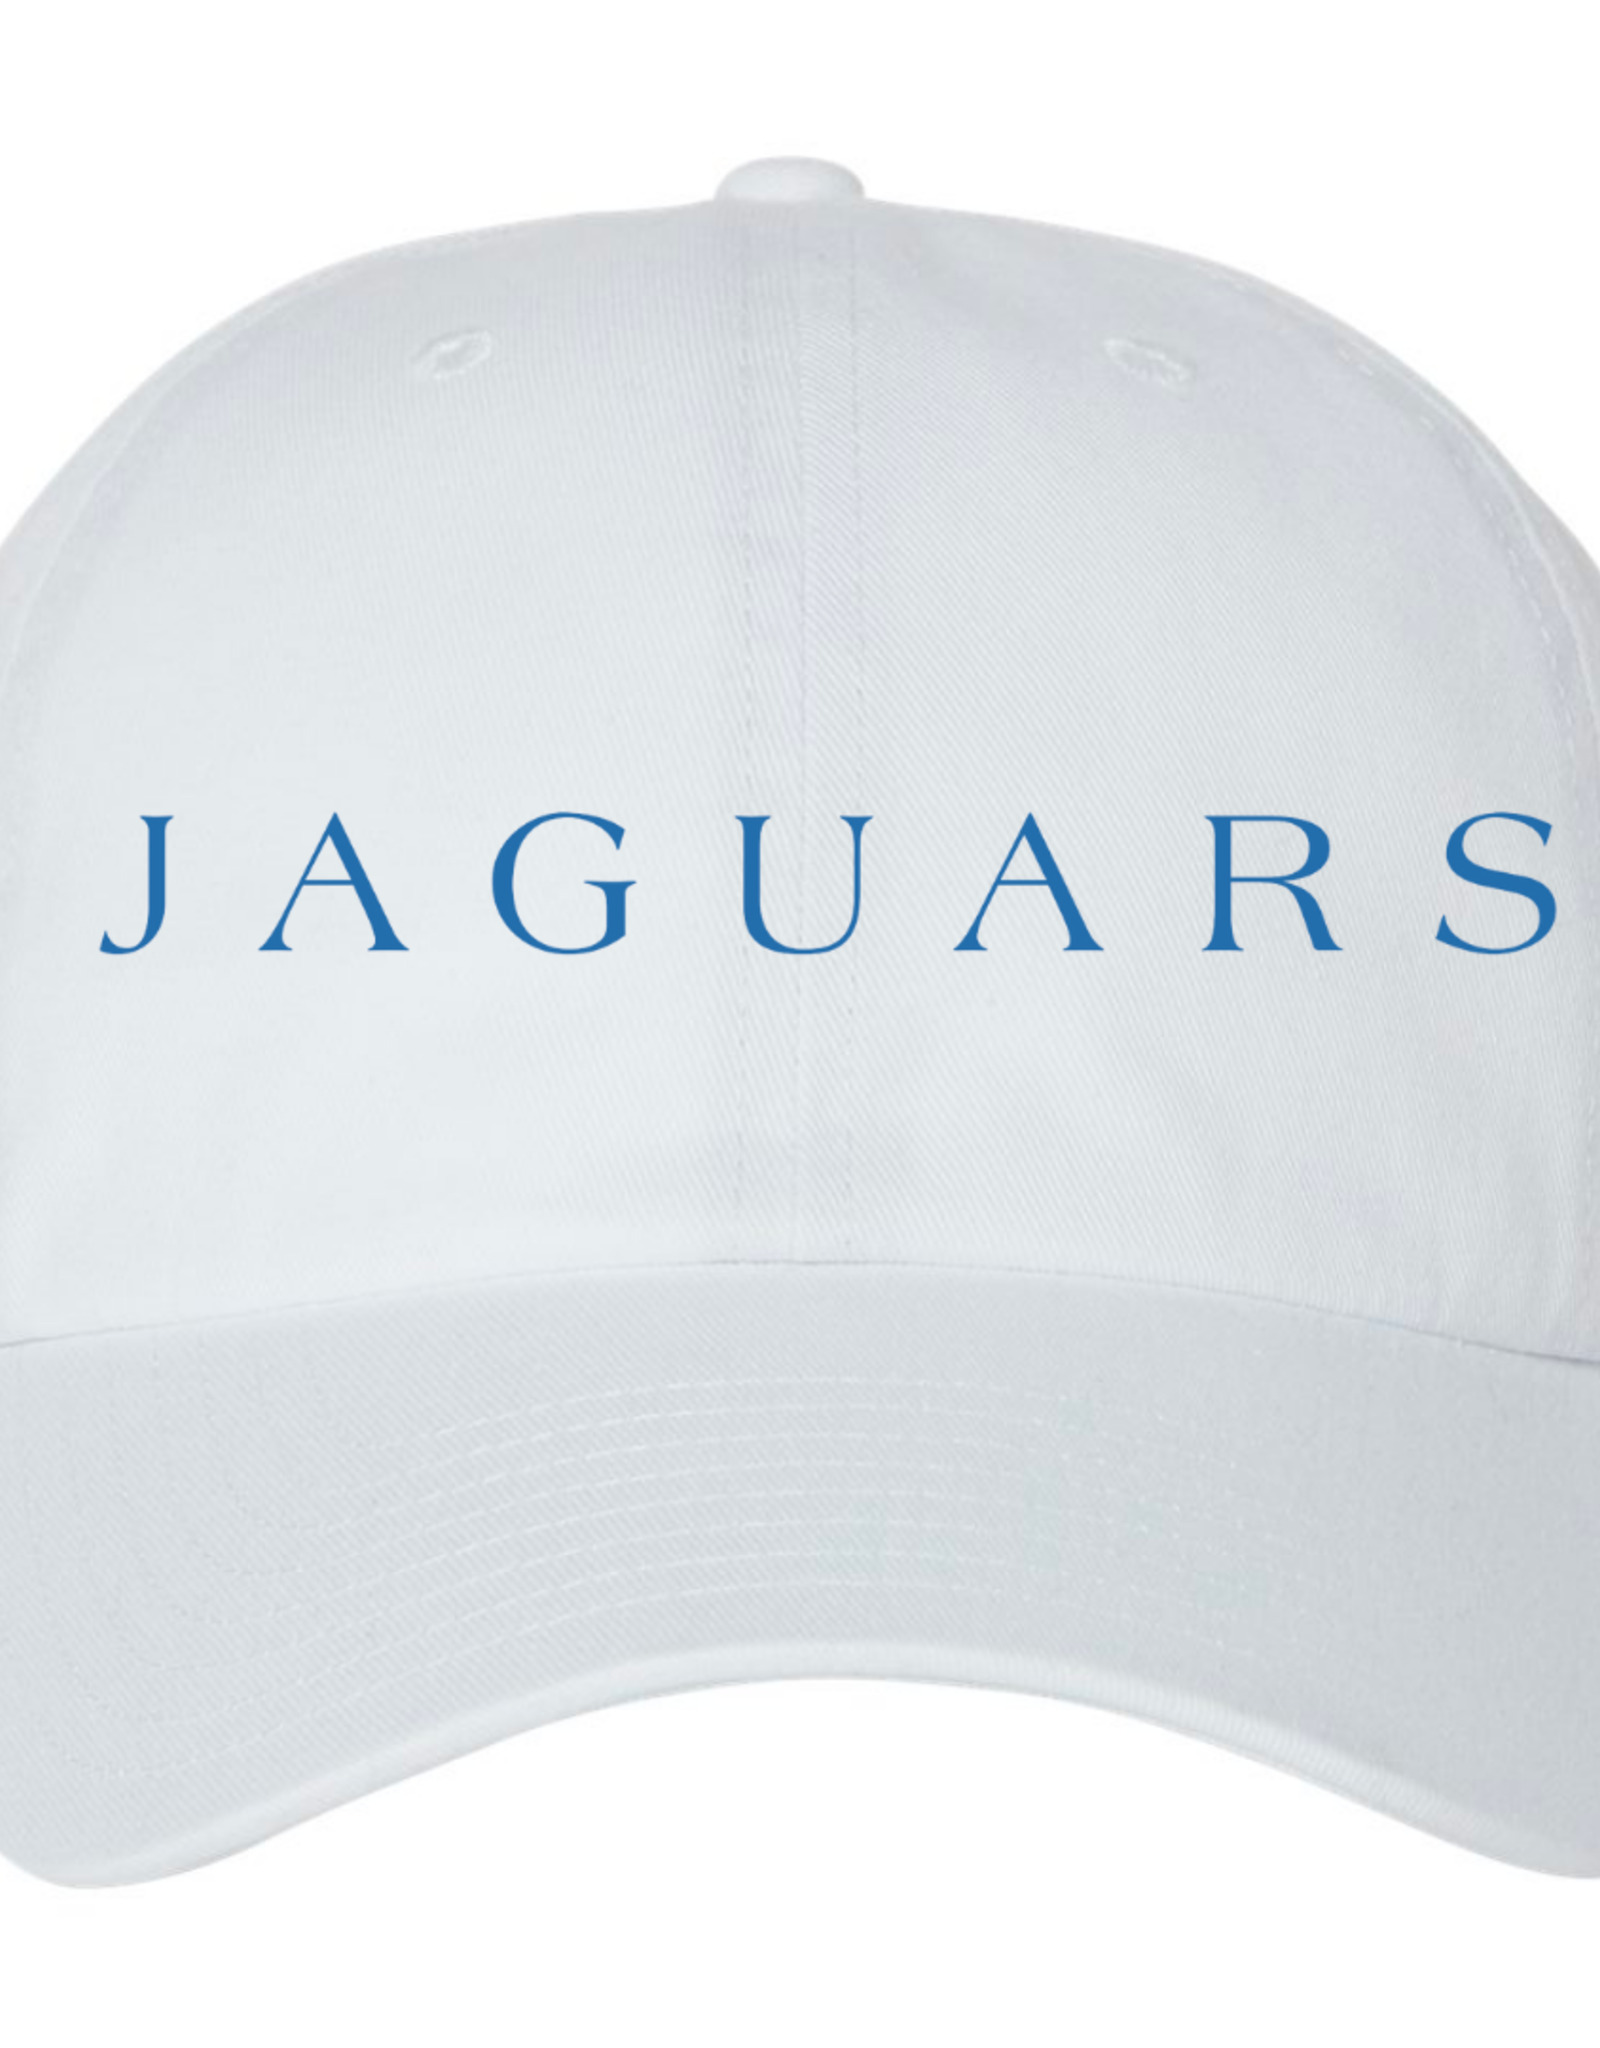 '47 White Garment Washed Twill Adjustable Hat Embroidered "JAGUARS" in Blue